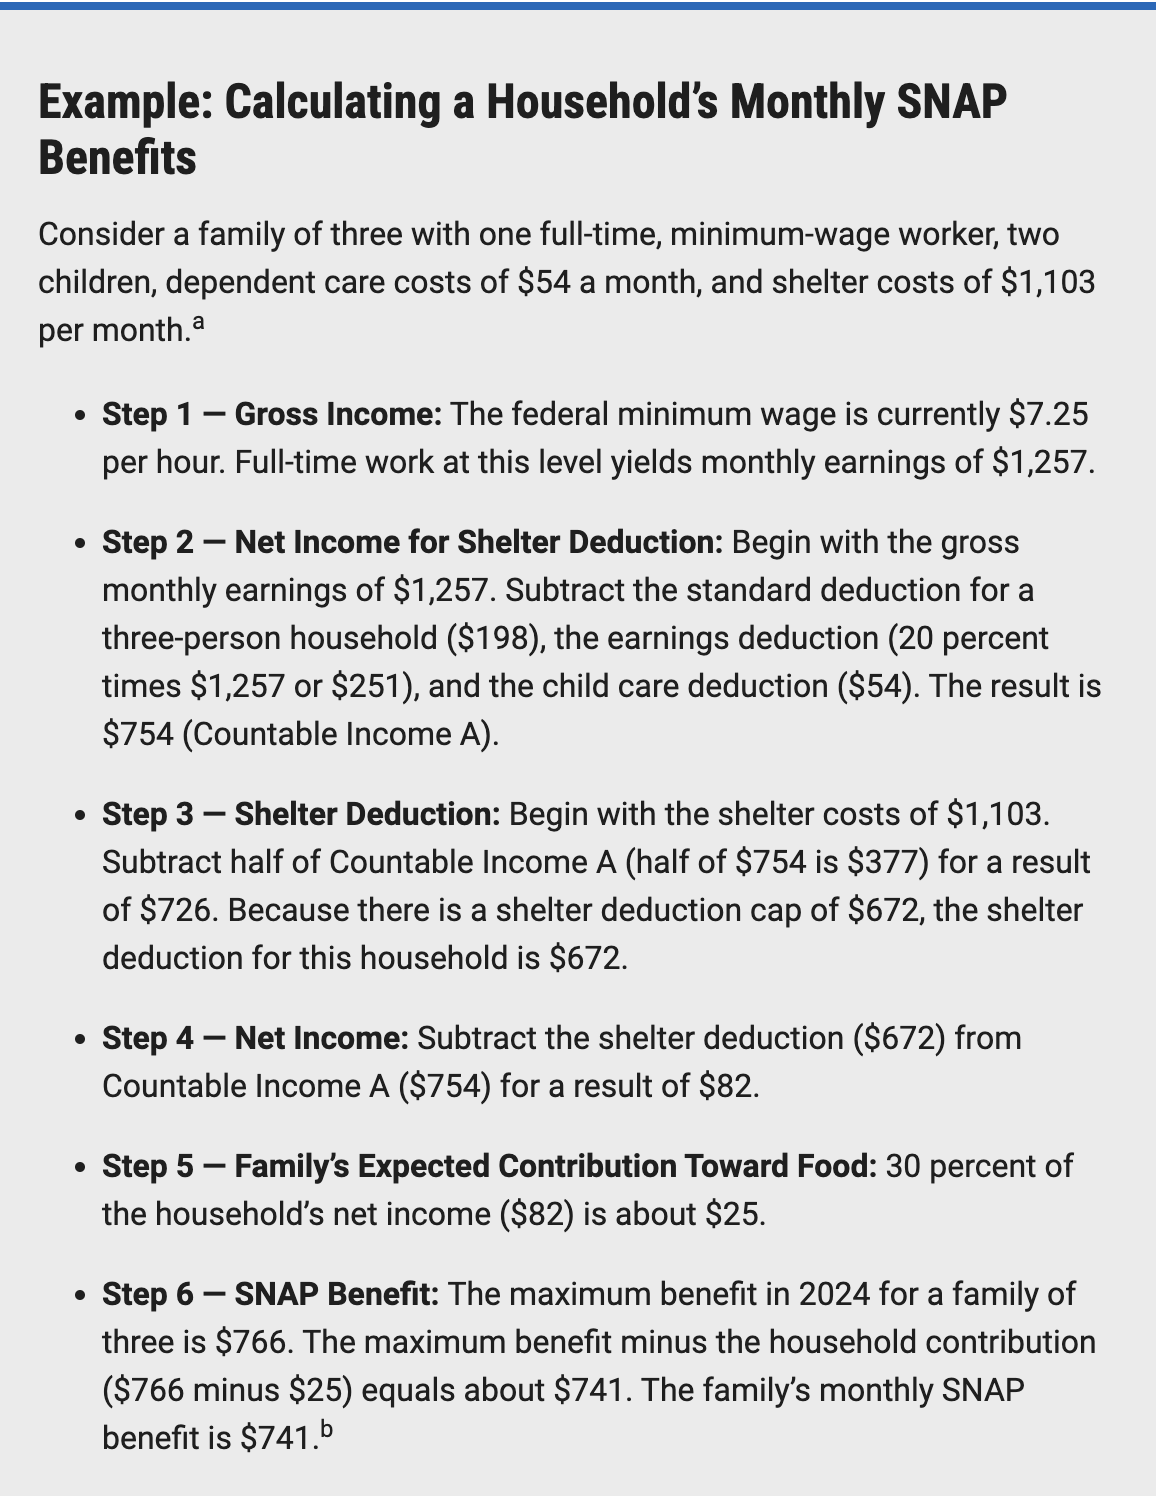 How to Calculate a Household's SNAP Benefits in 2024